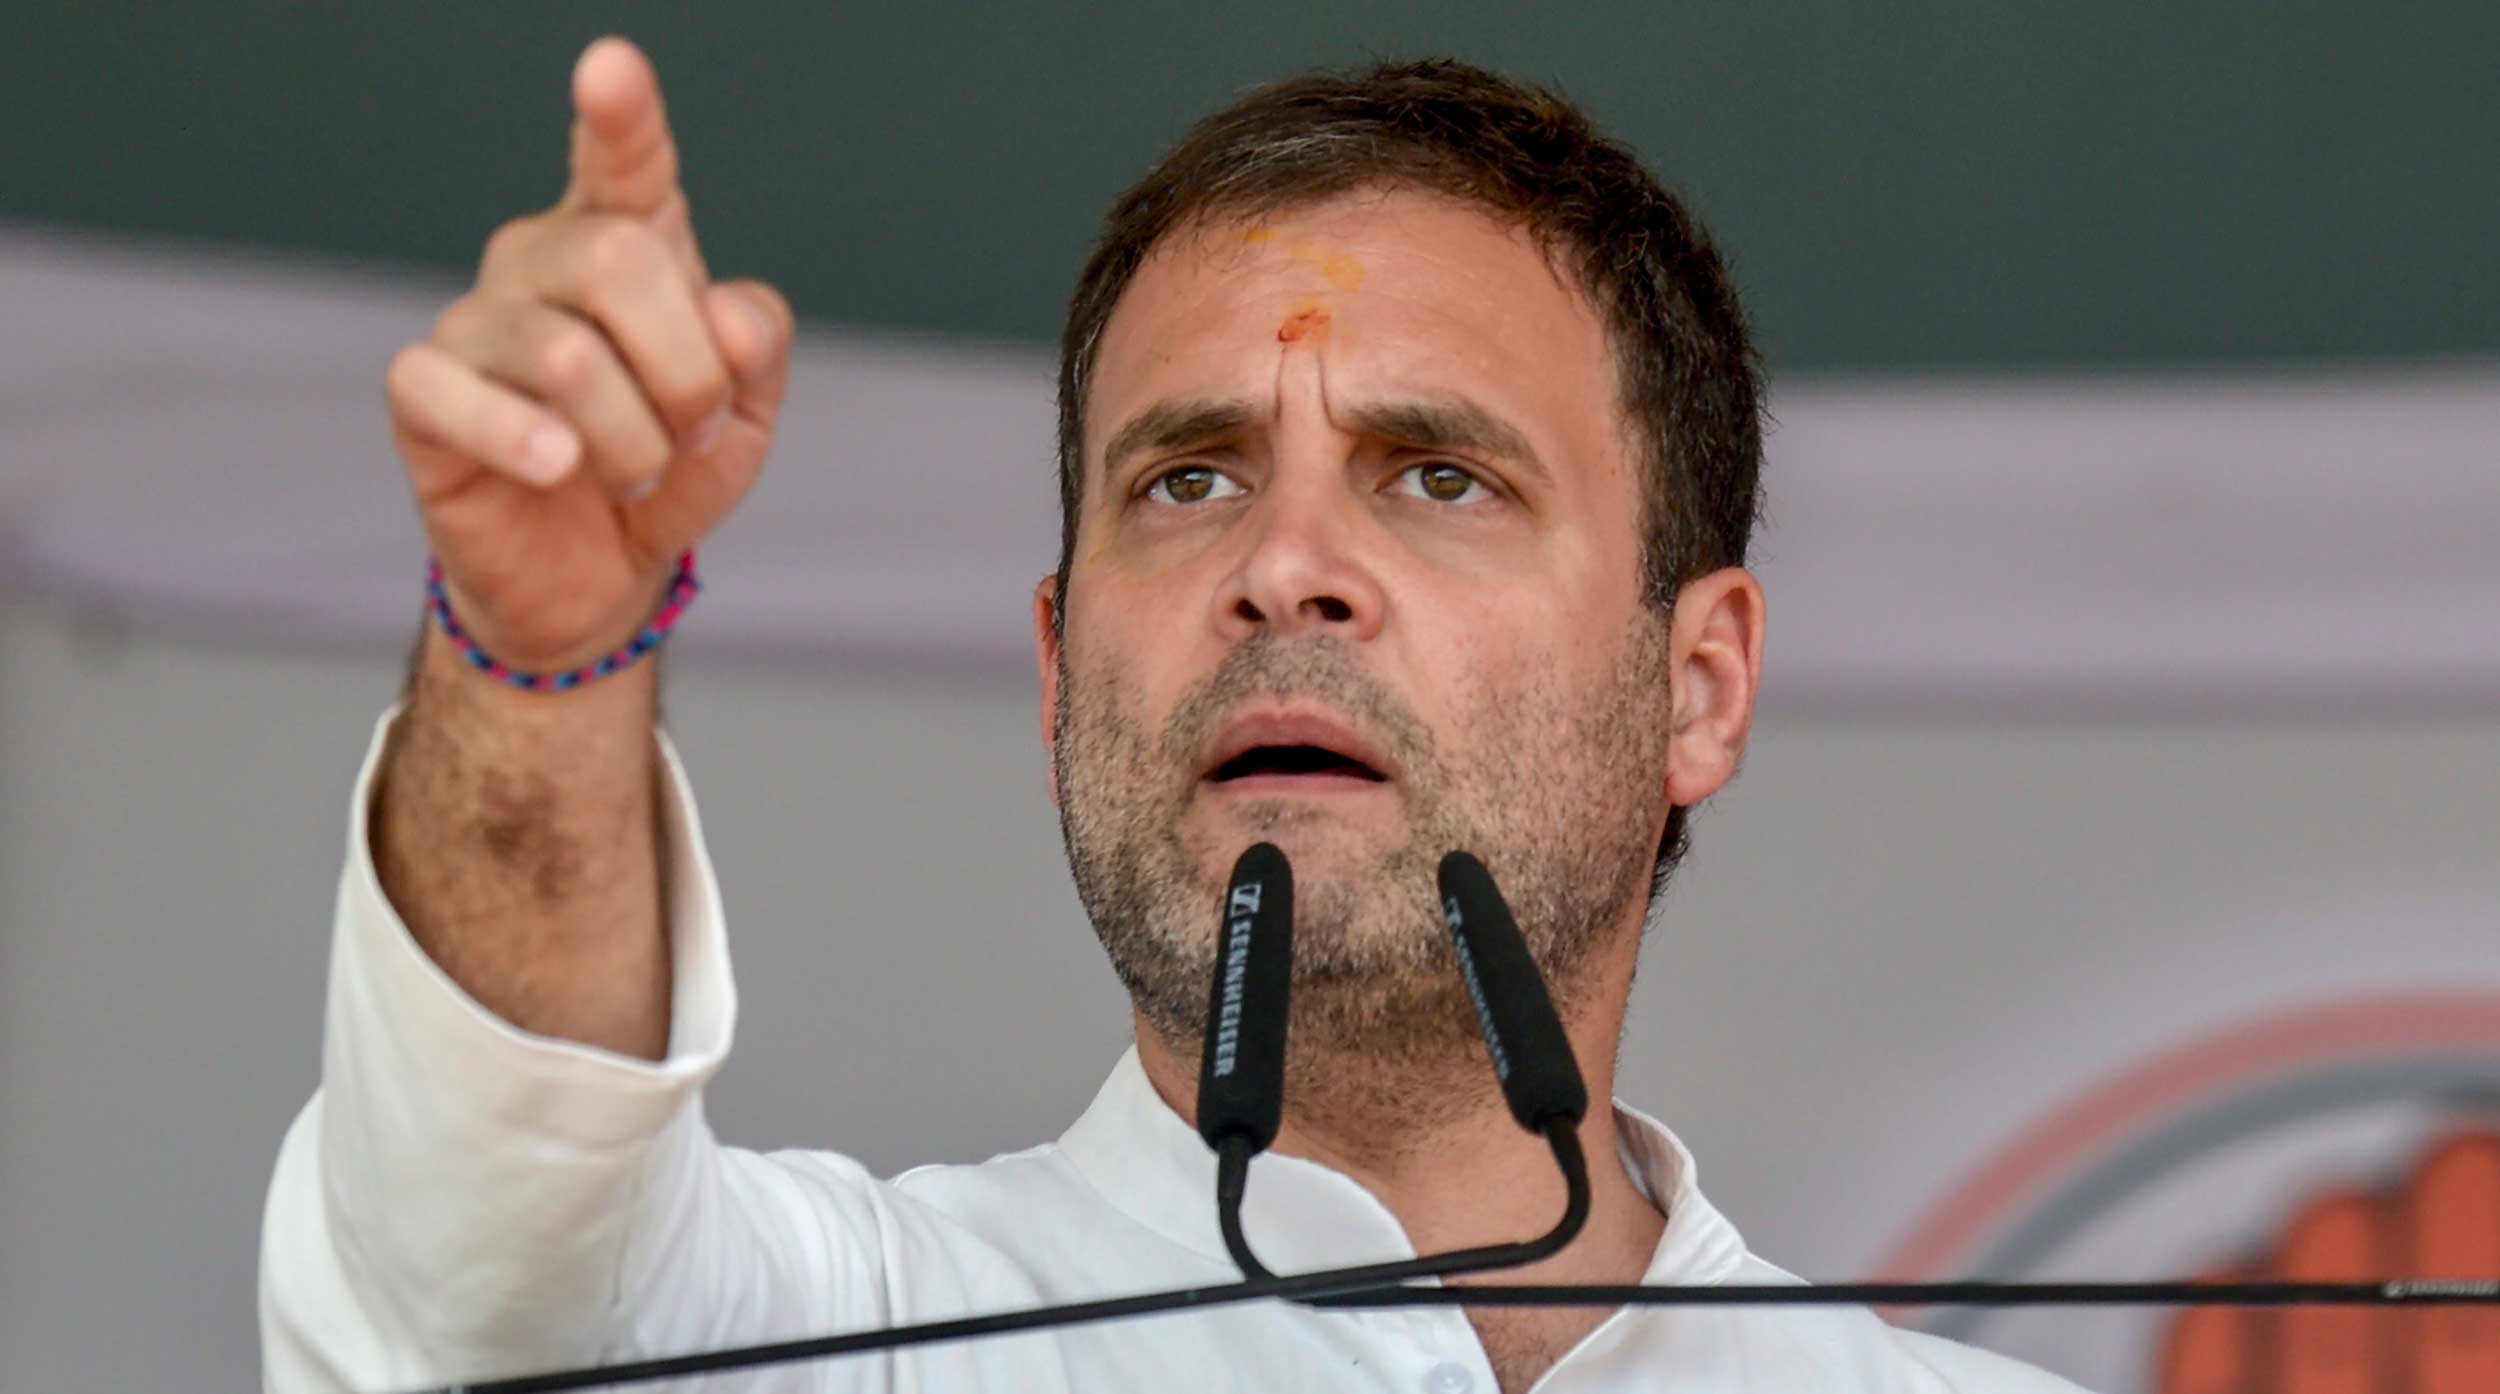 Instead of acknowledging (even privately) that his campaign against Narendra Modi’s alleged corruption did not work and was possibly counter-productive, Rahul Gandhi appears to be blaming his own party for not echoing his slogan loudly enough